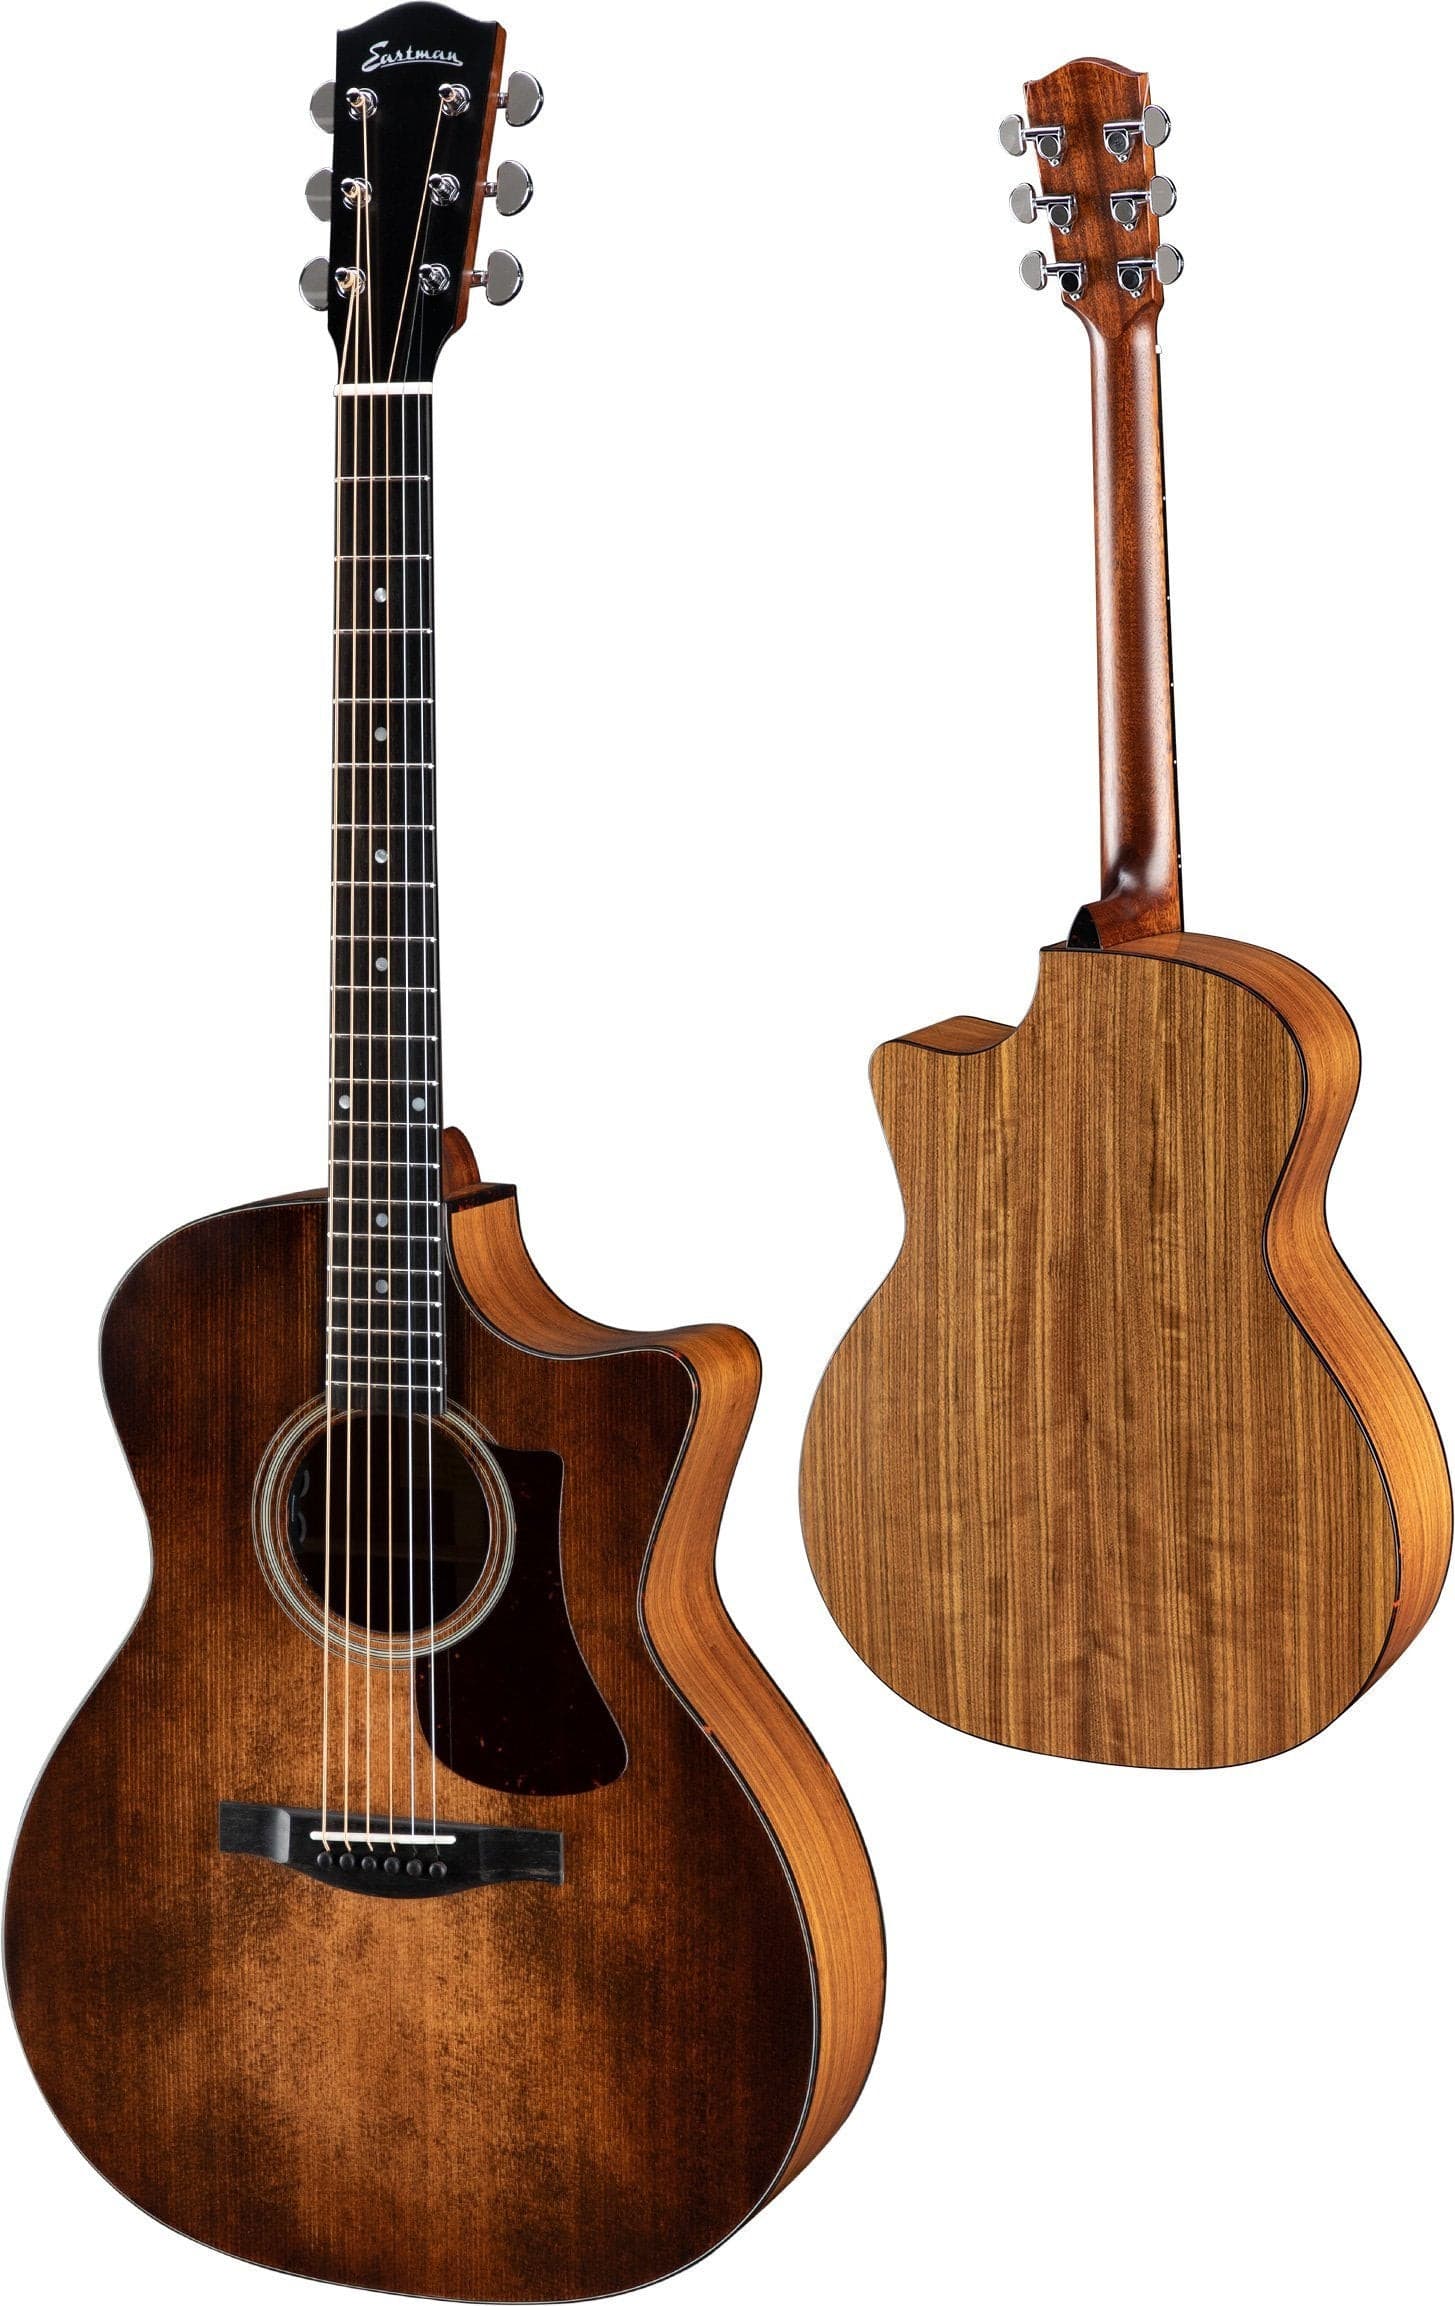 Eastman AC222CE OV Classic finish, Electro Acoustic Guitar for sale at Richards Guitars.